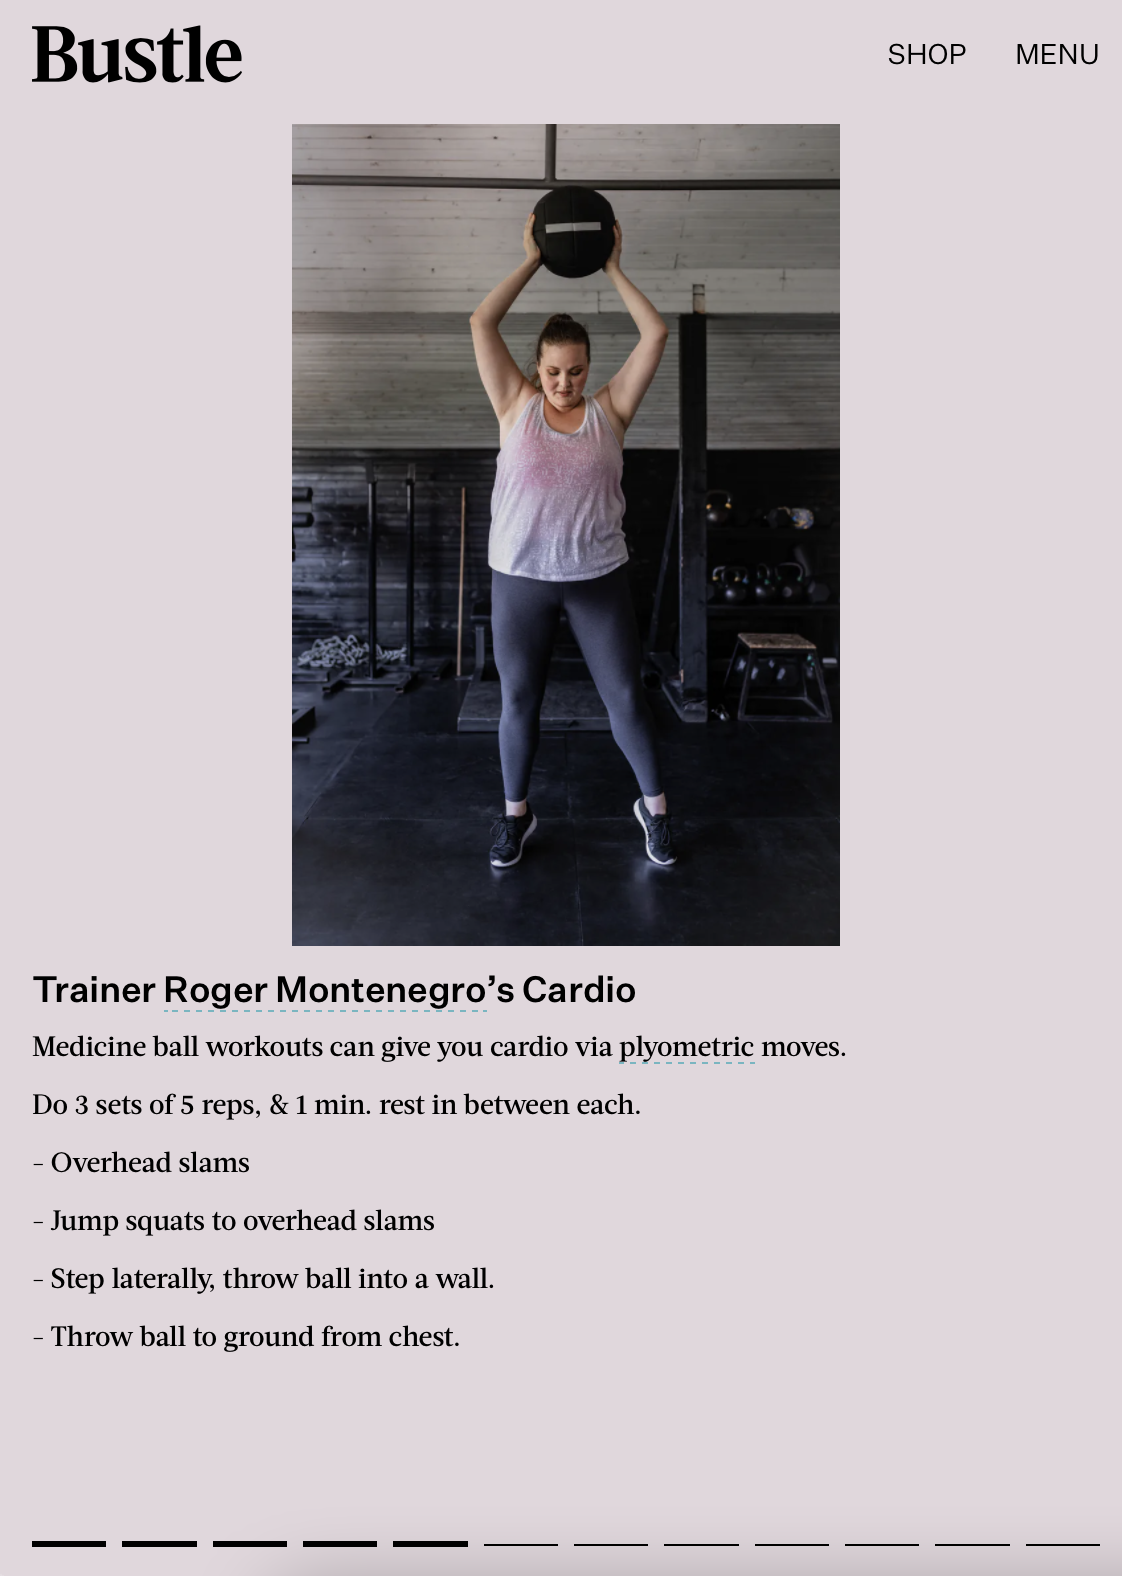 MPPT Made Possible Personal Training Featured in Bustle Magazine